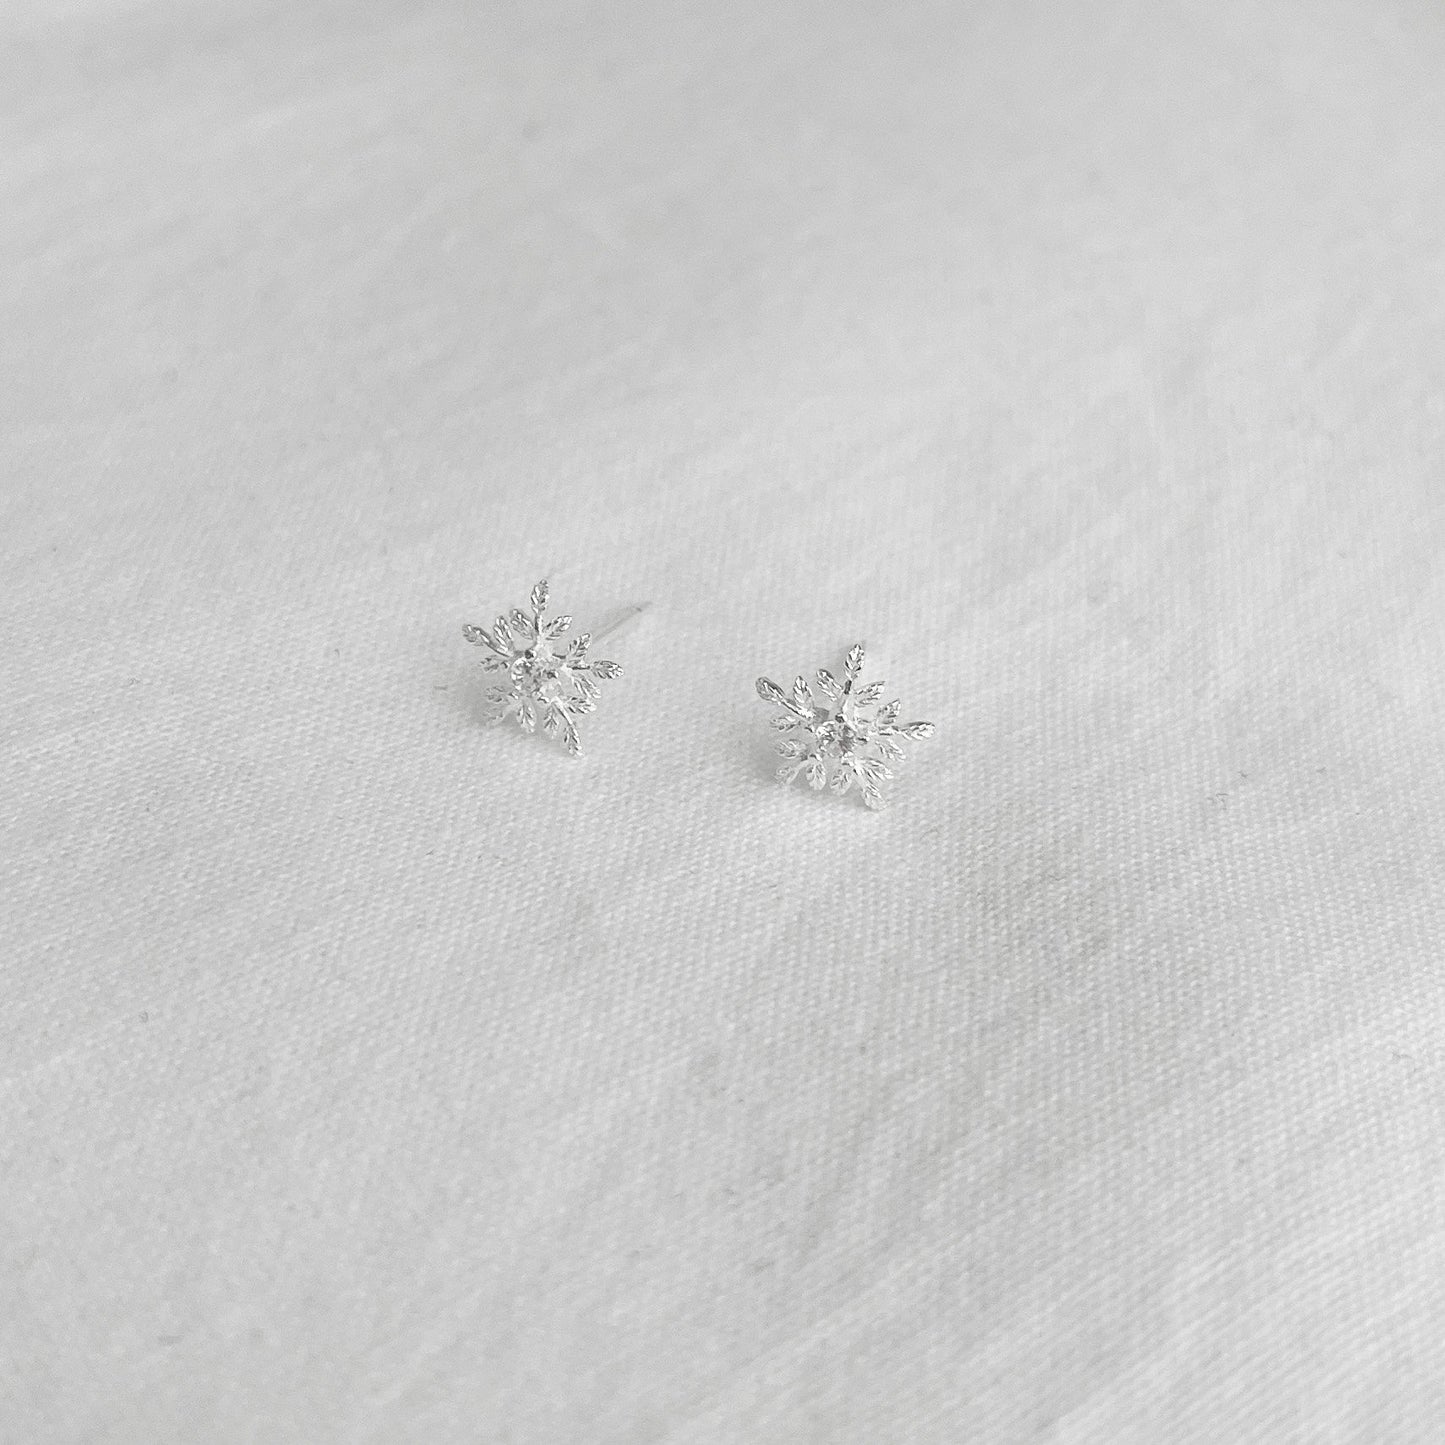 Frosty Snowflake (925 sterling silver) Studs